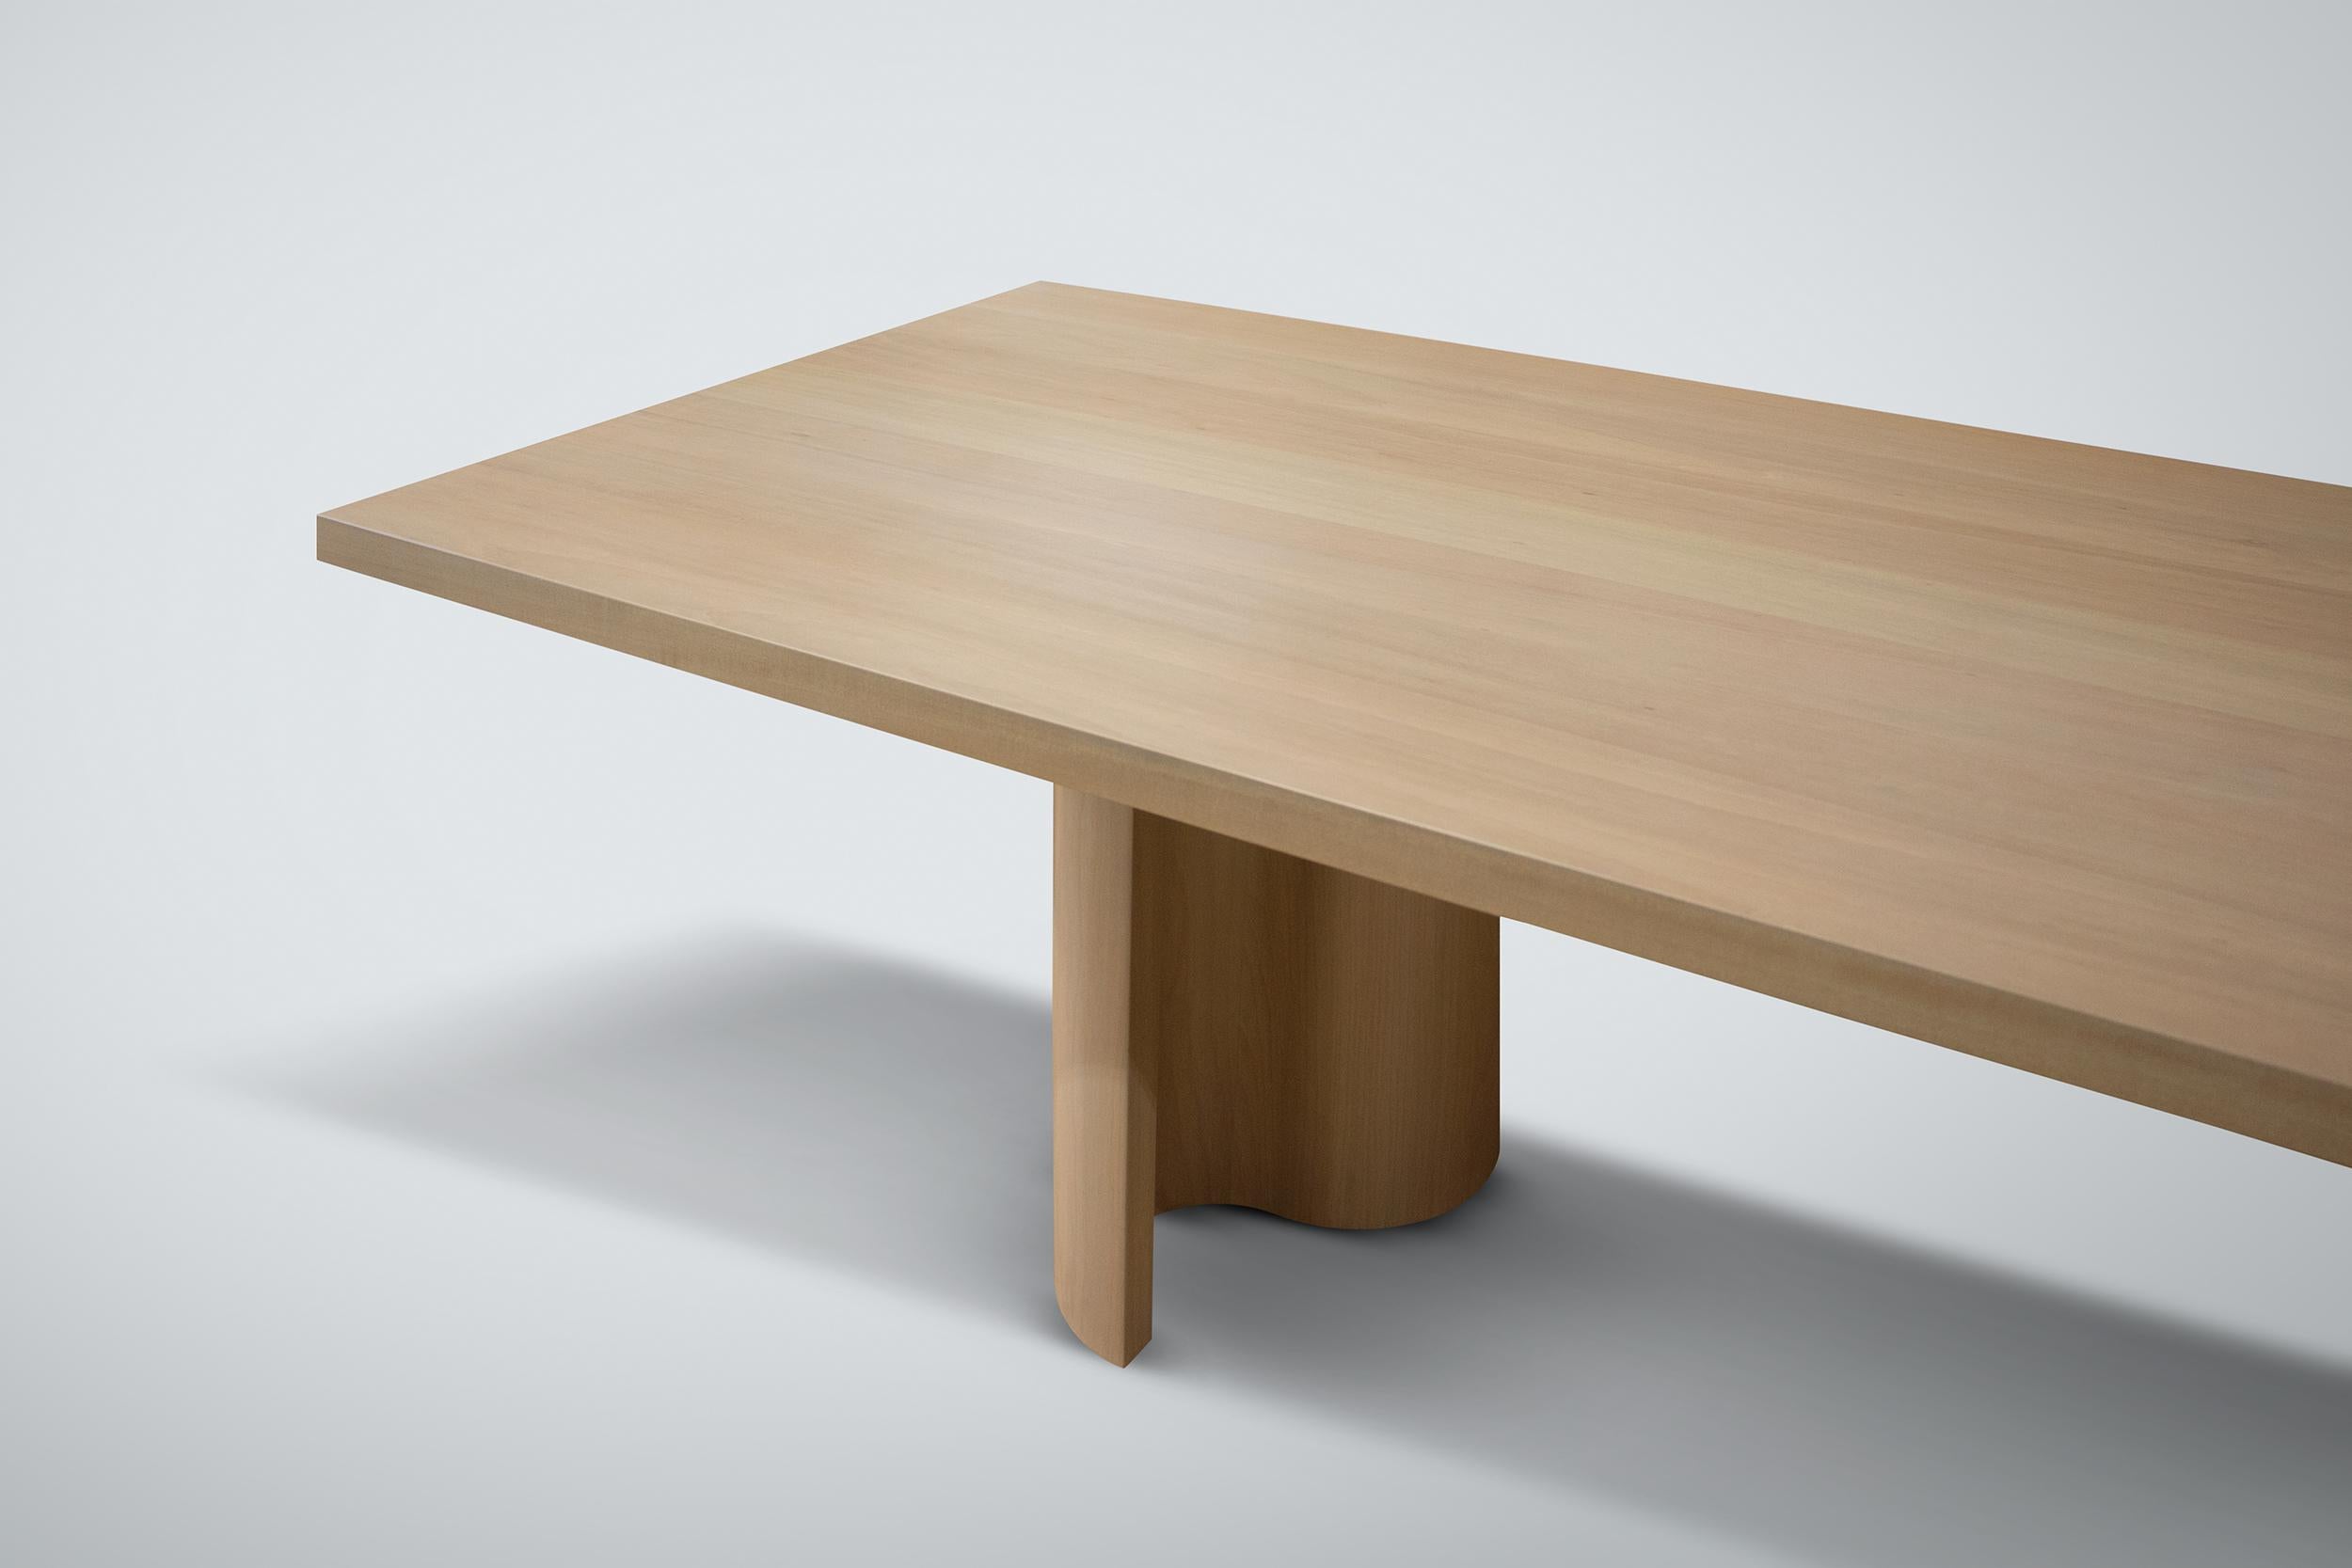 Our wave dining table shown in domestic hardwood with a clear lacquer finish.